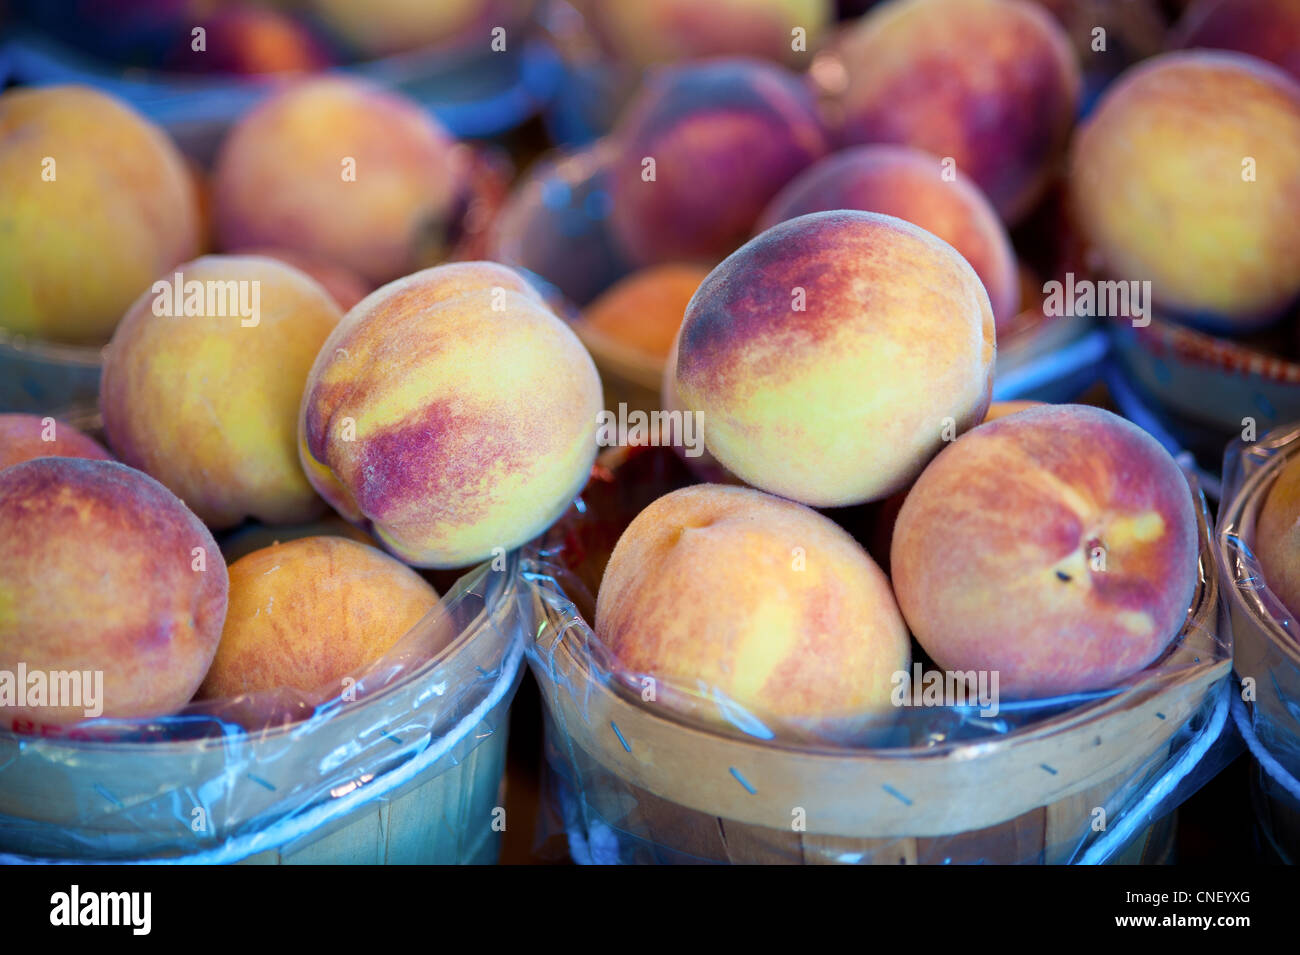 Small baskets of peaches Stock Photo